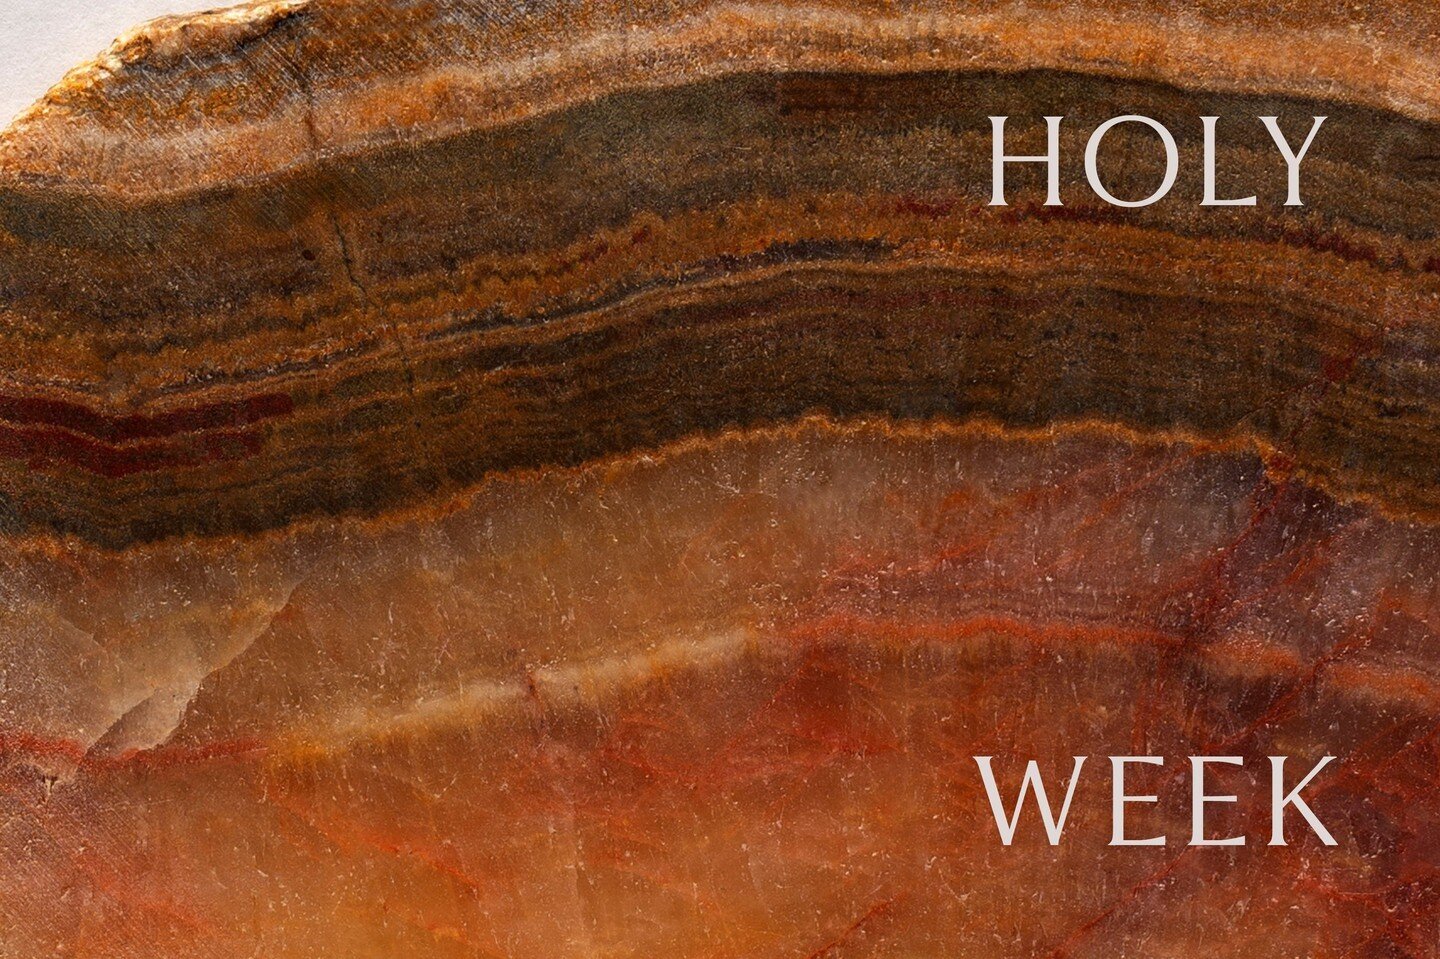 This week, we&rsquo;re joining the historic church in remembering the suffering, death, and resurrection of Jesus. We're grateful for rhythms of Holy Week that engage our hearts, minds, and bodies and draw us in to walk closely with Jesus on his jour